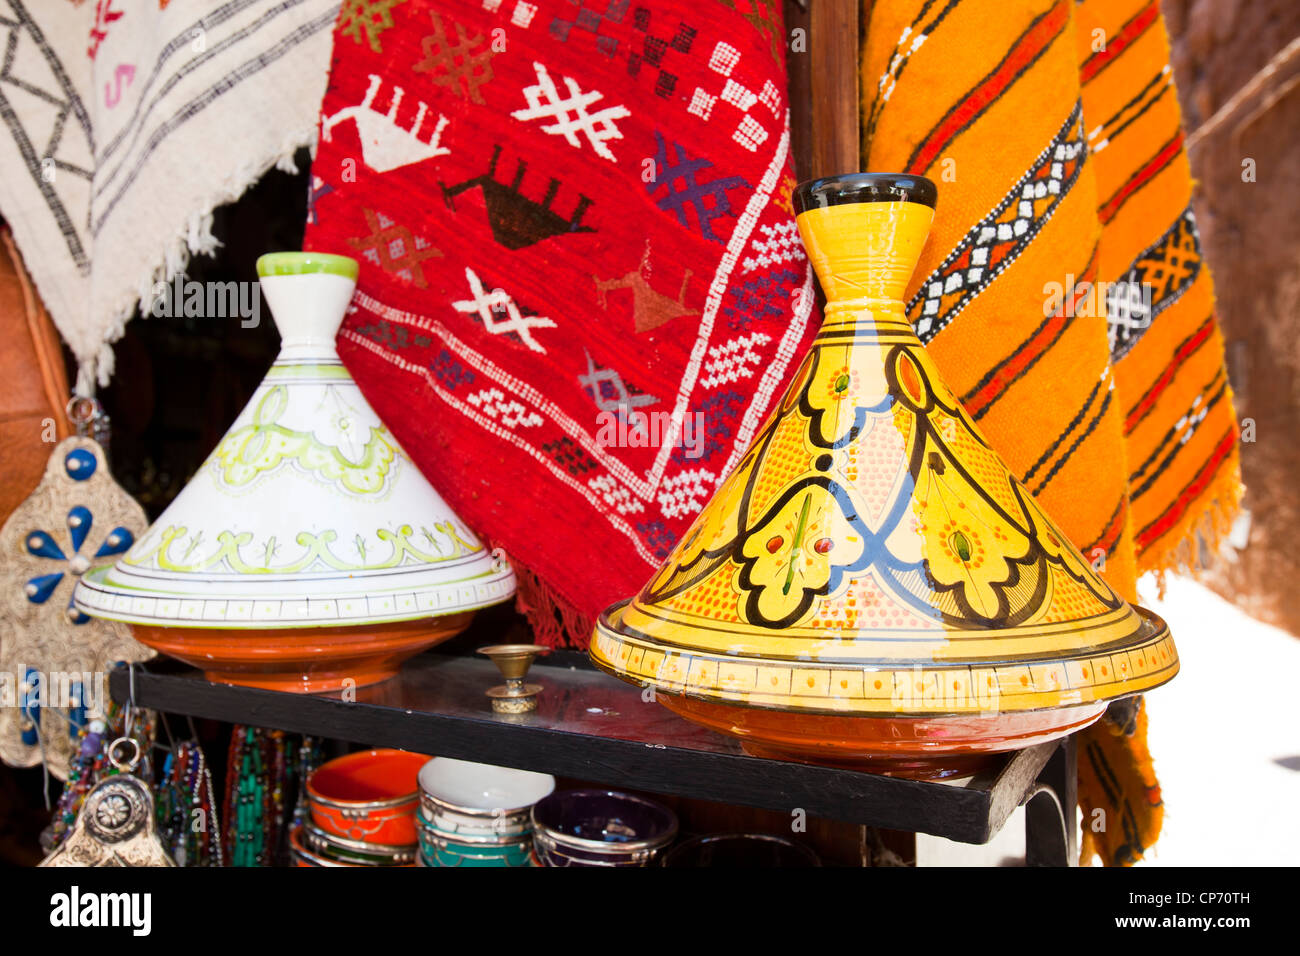 Tagines on a stand at a souk in Marrakech, Morocco, North Africa. Stock Photo